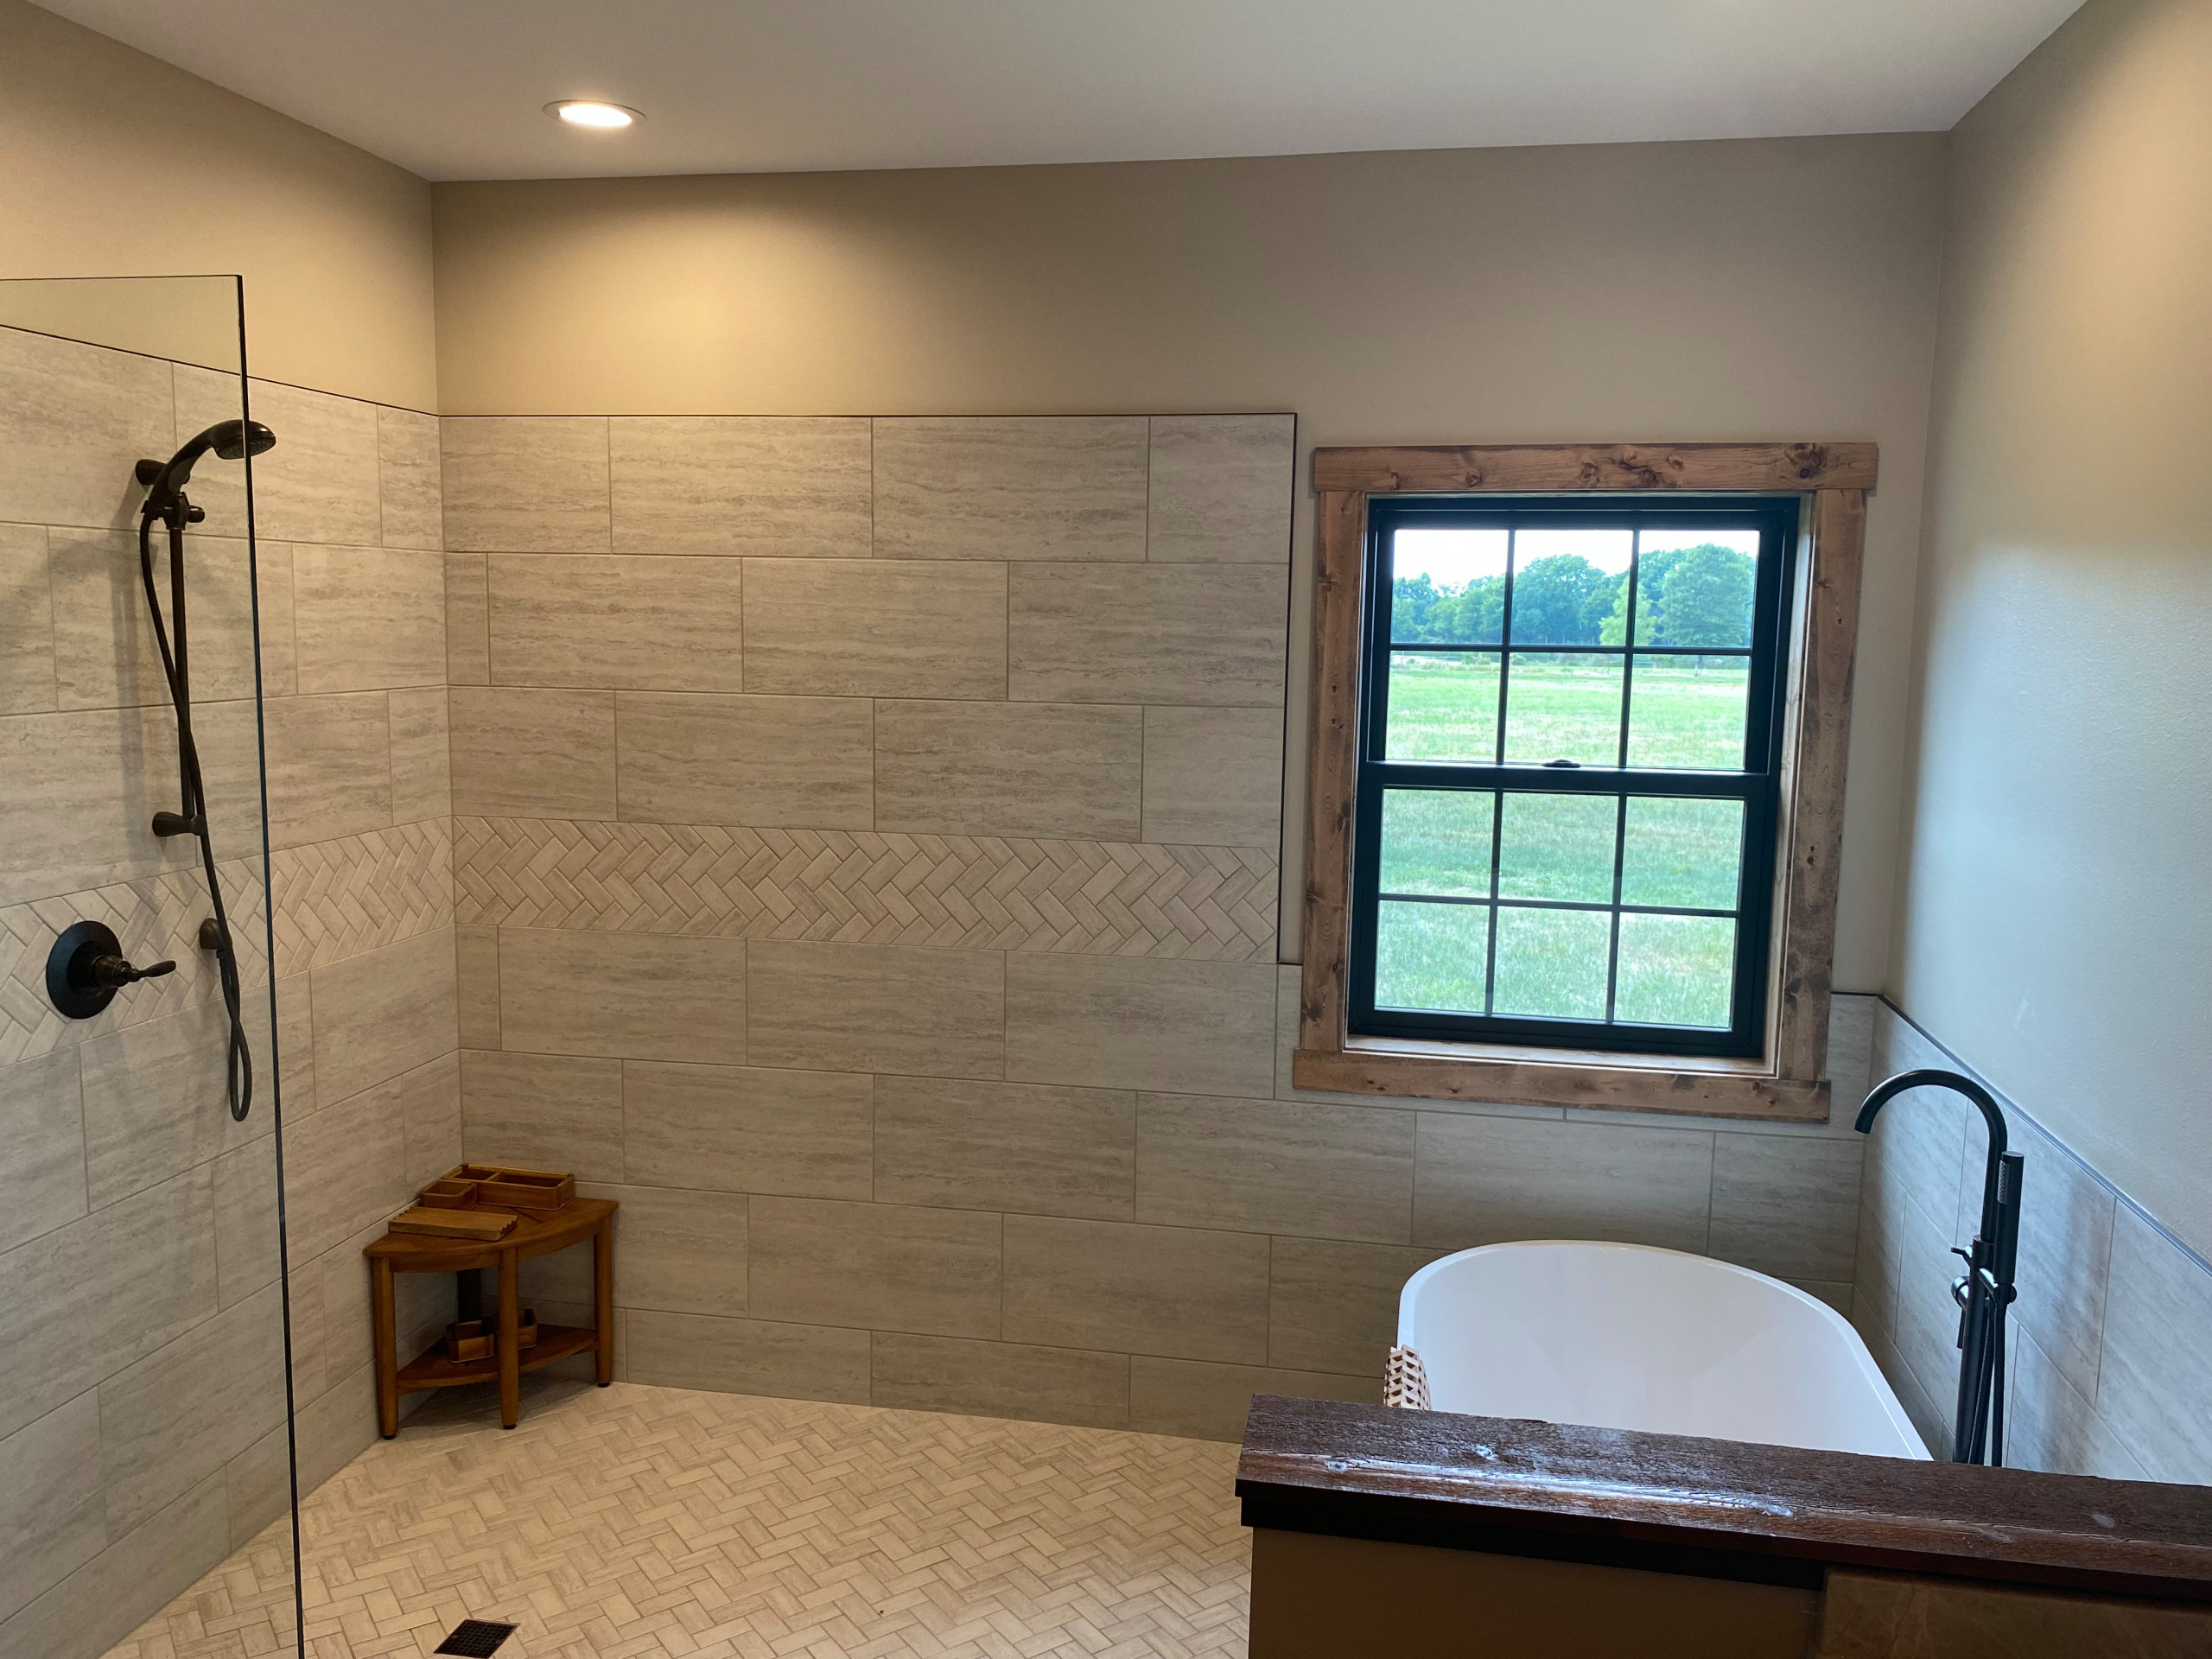 Master bath wet room with partial glass wall